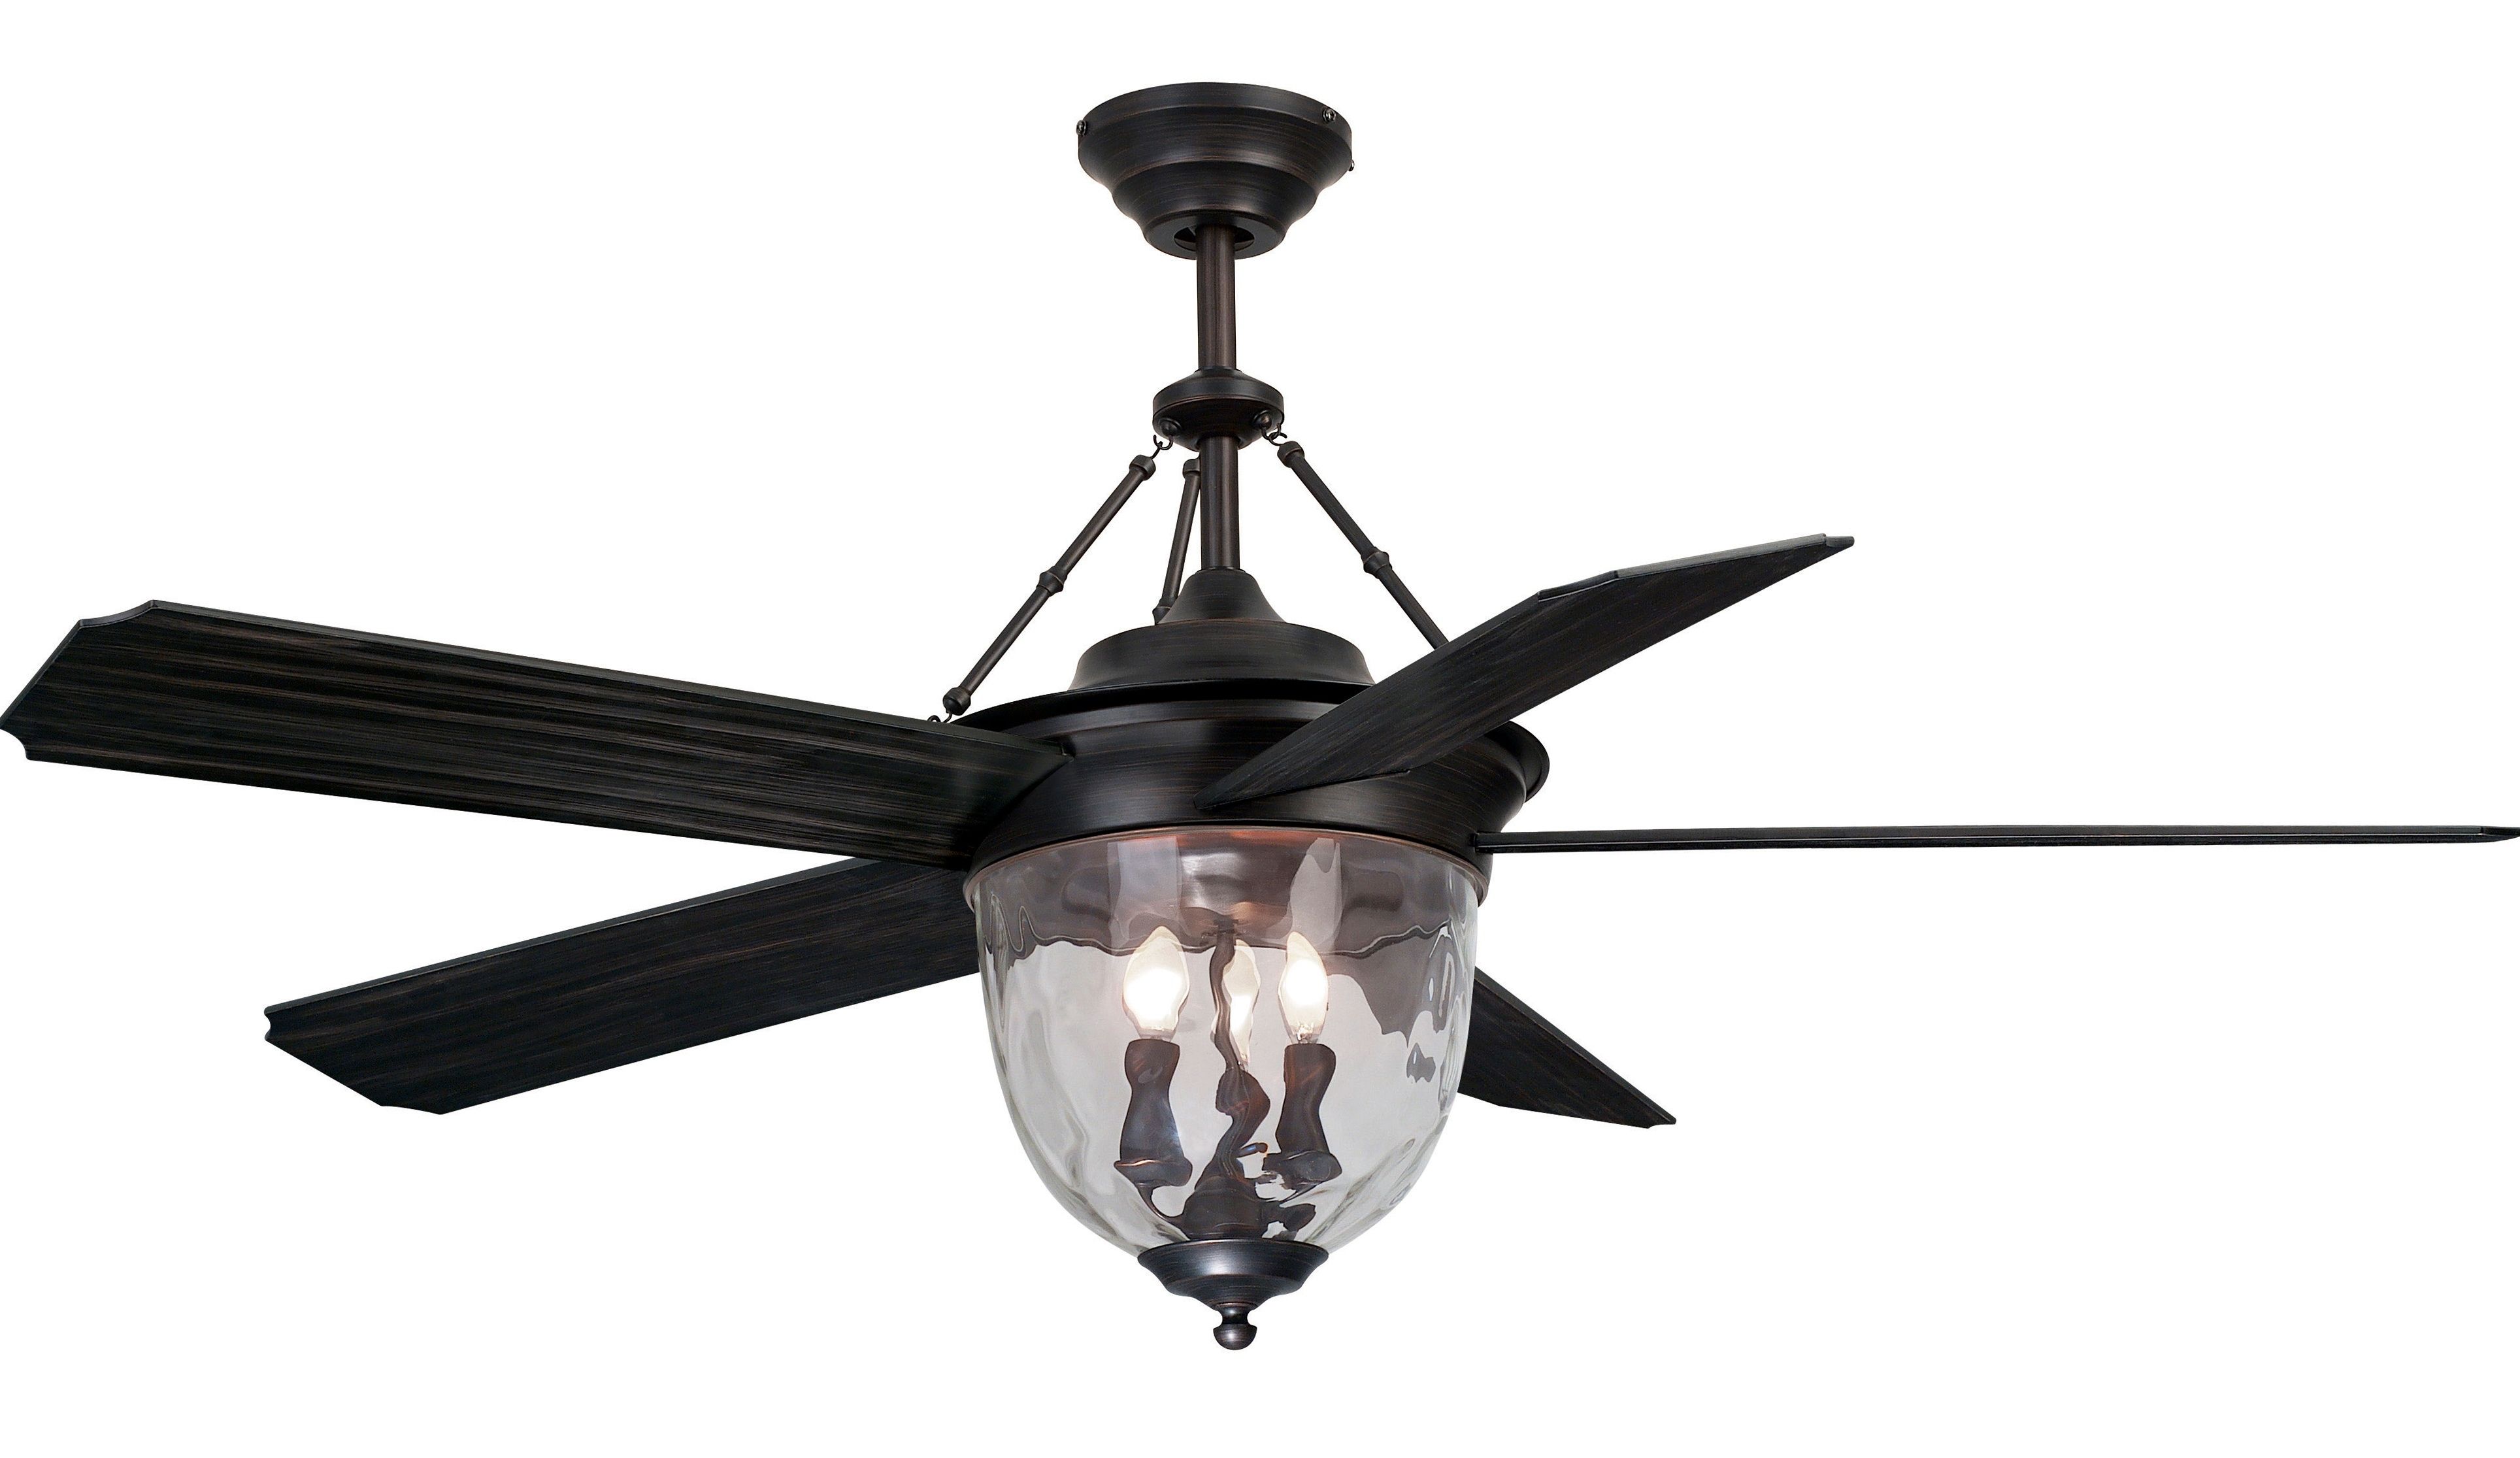 Lowes Outdoor Ceiling Fans With Light Home Design Ideas Plus Fan Inside Outdoor Ceiling Fans With Lights And Remote (View 10 of 15)